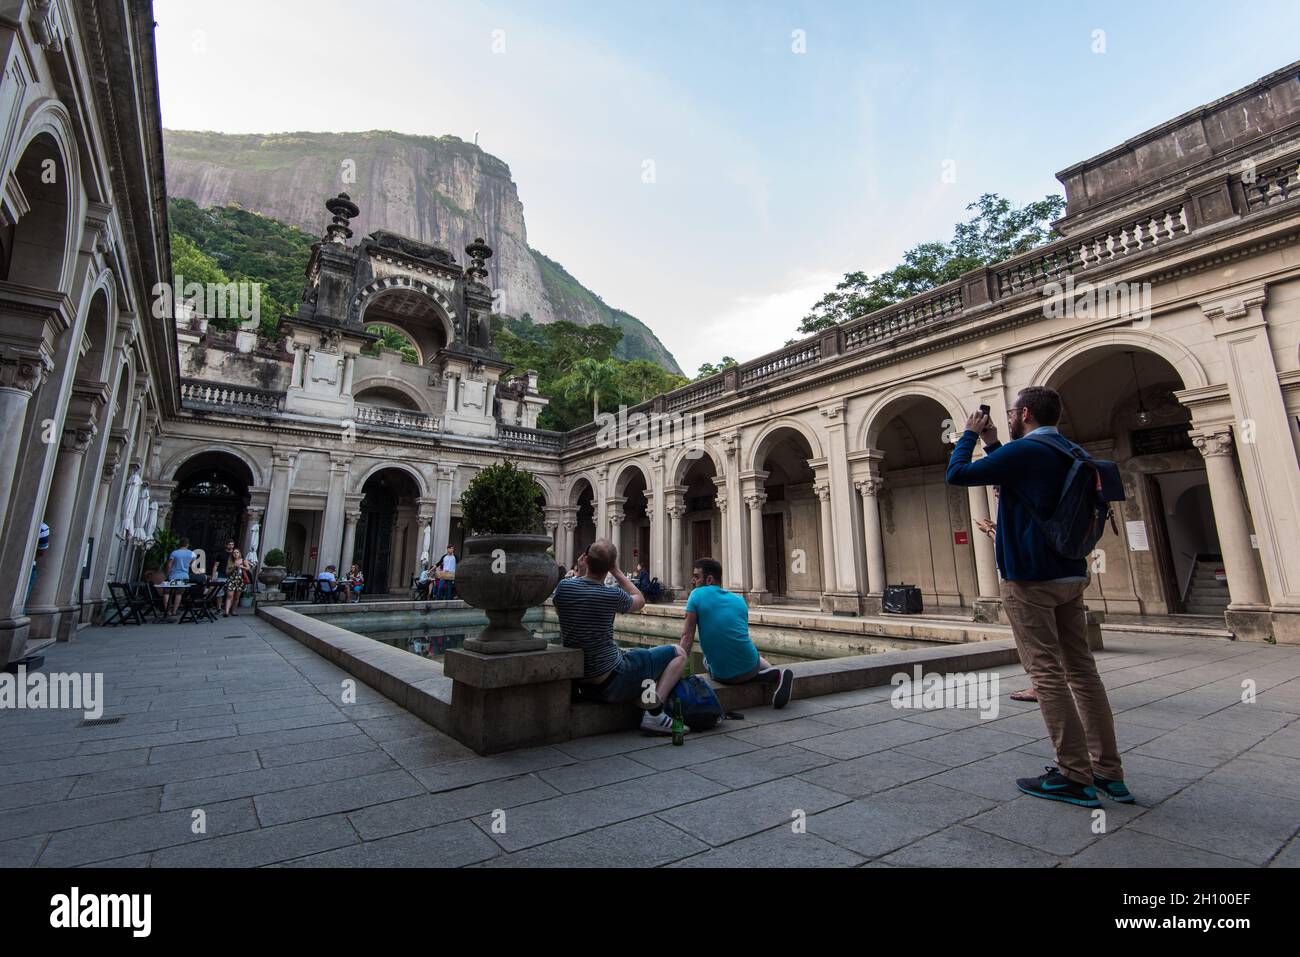 RIO DE JANEIRO, BRAZIL - JULY 8, 2016: Courtyard of the mansion of Parque Lage. Visual Arts School and a cafe are open to the public. Stock Photo